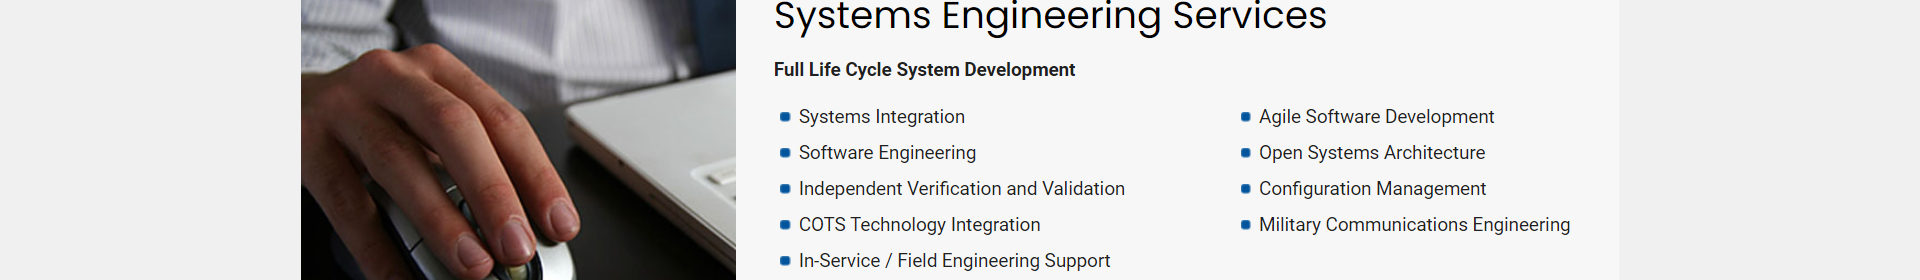 Systems Engineering Services